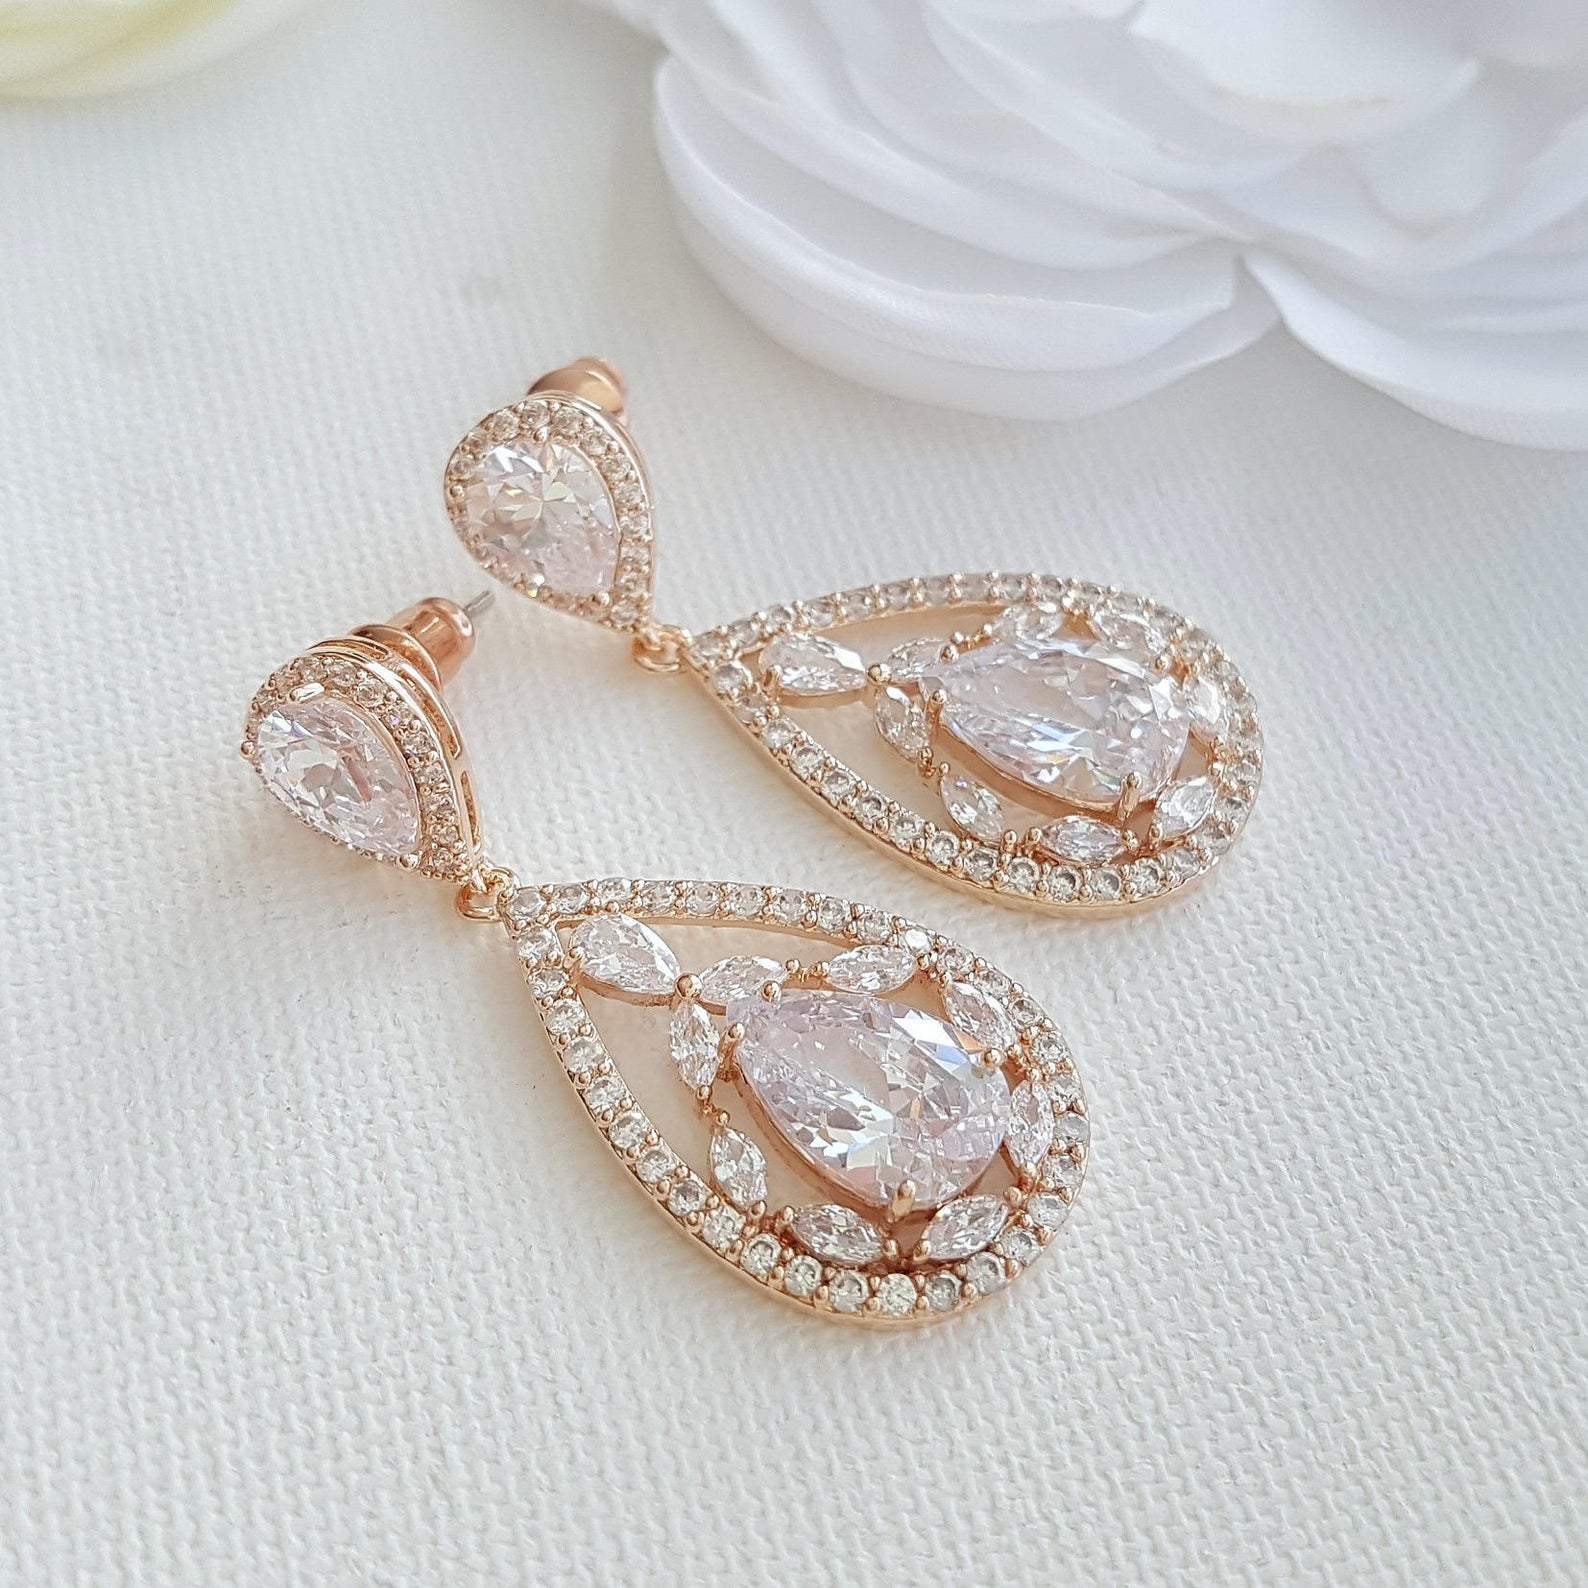 Rose gold Plated Drop Earrings for Brides-Esther - PoetryDesigns